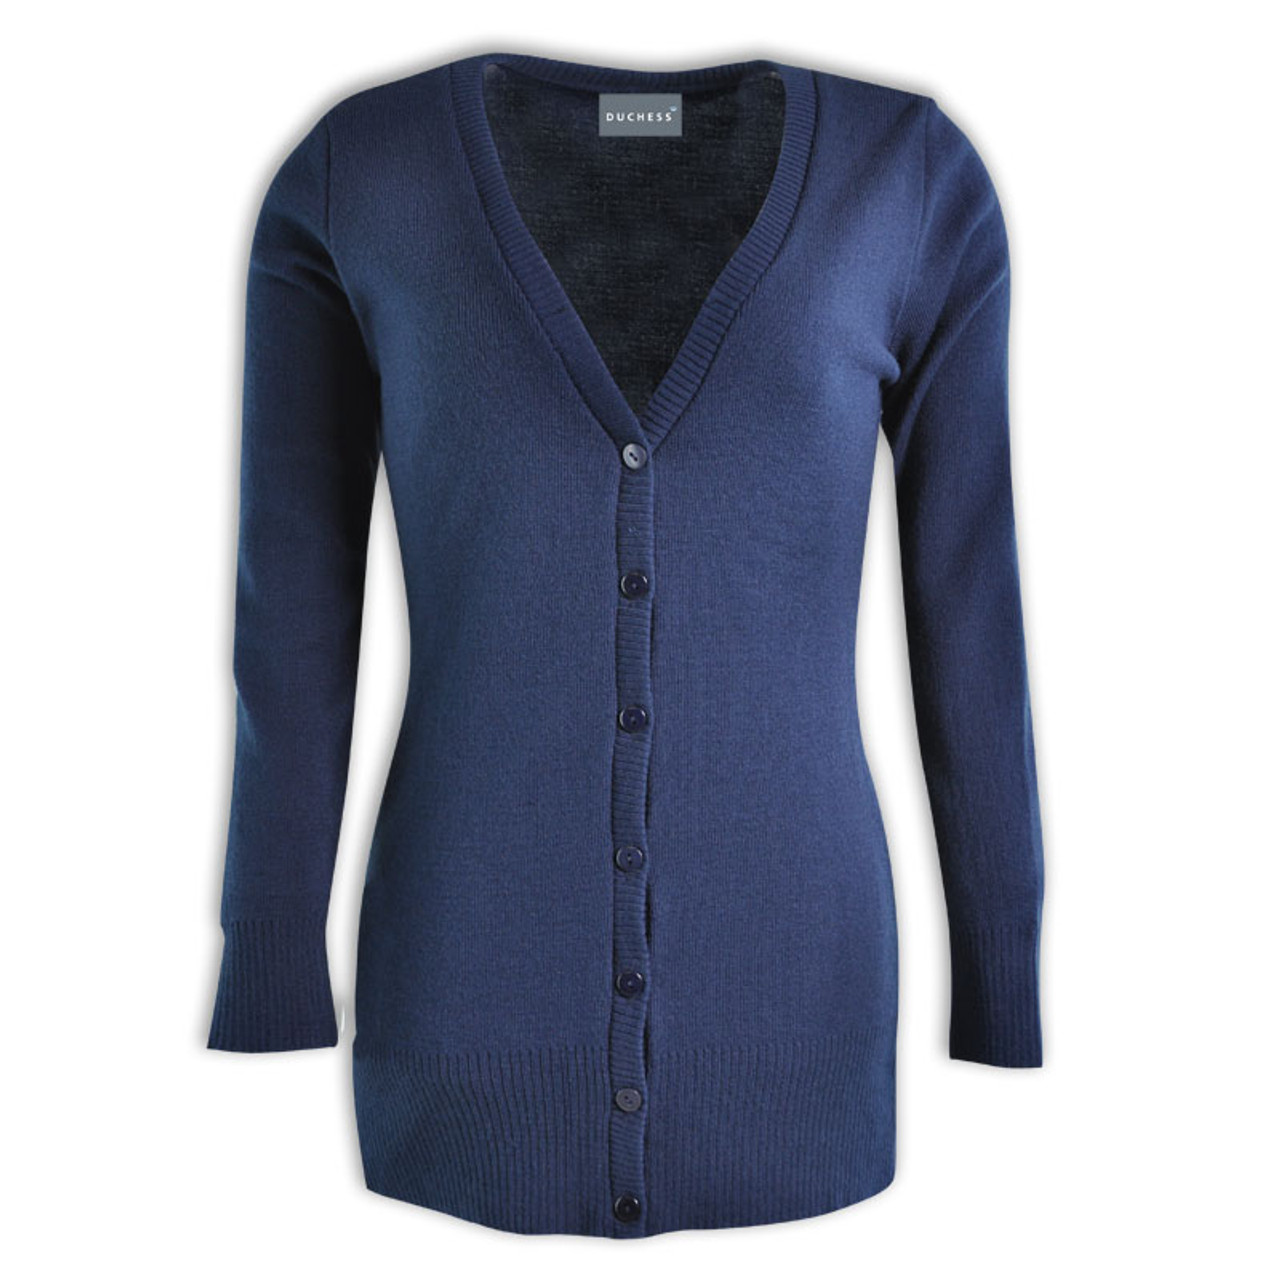 Kelly Cardigan | Ladies Cardigan Suppliers | Azulwear Cape Town, South ...